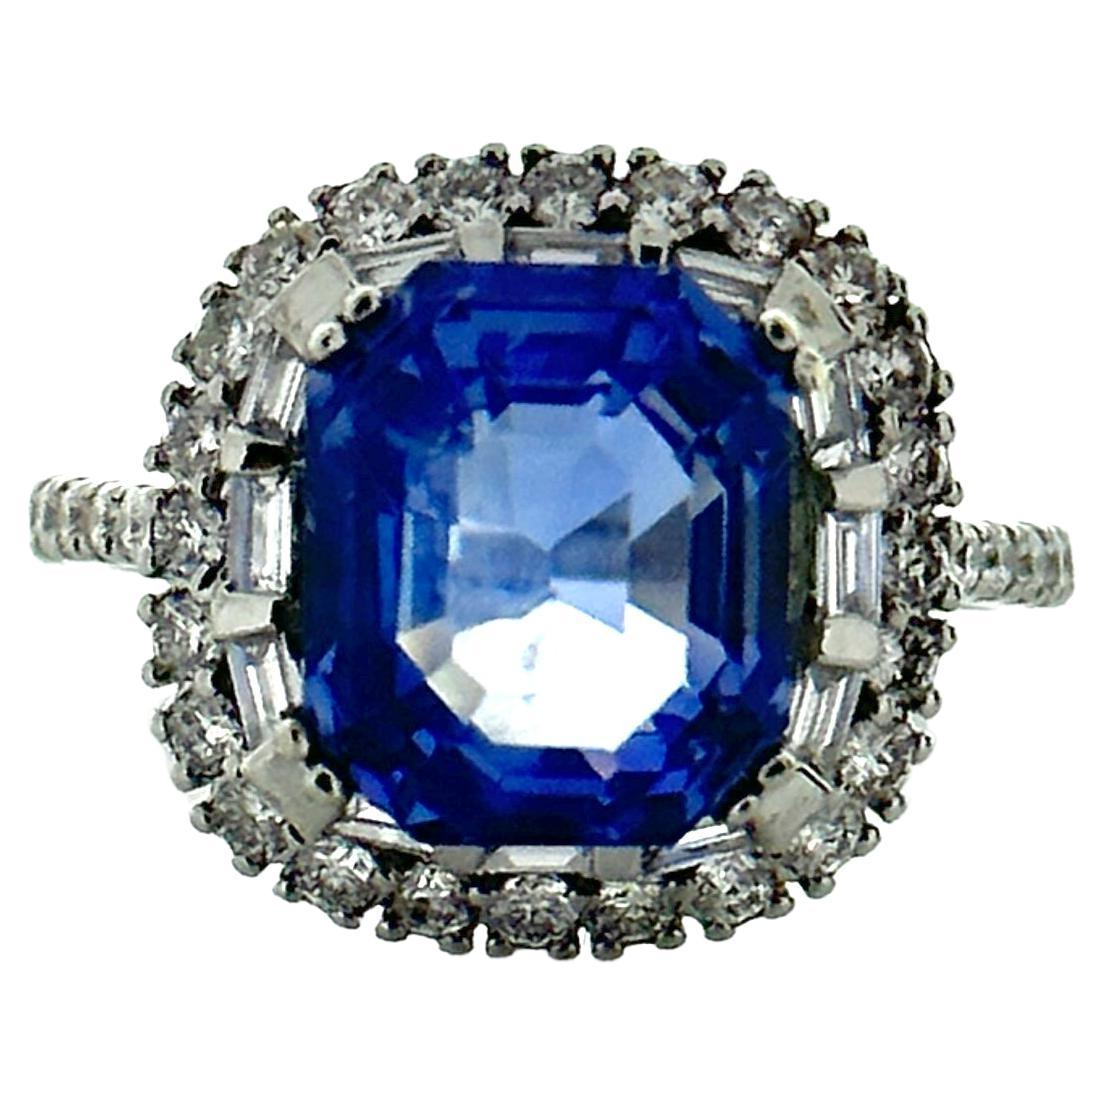 6.74CTW Blue Sapphire and 0.89CTW Diamond Ring in 14K White Gold